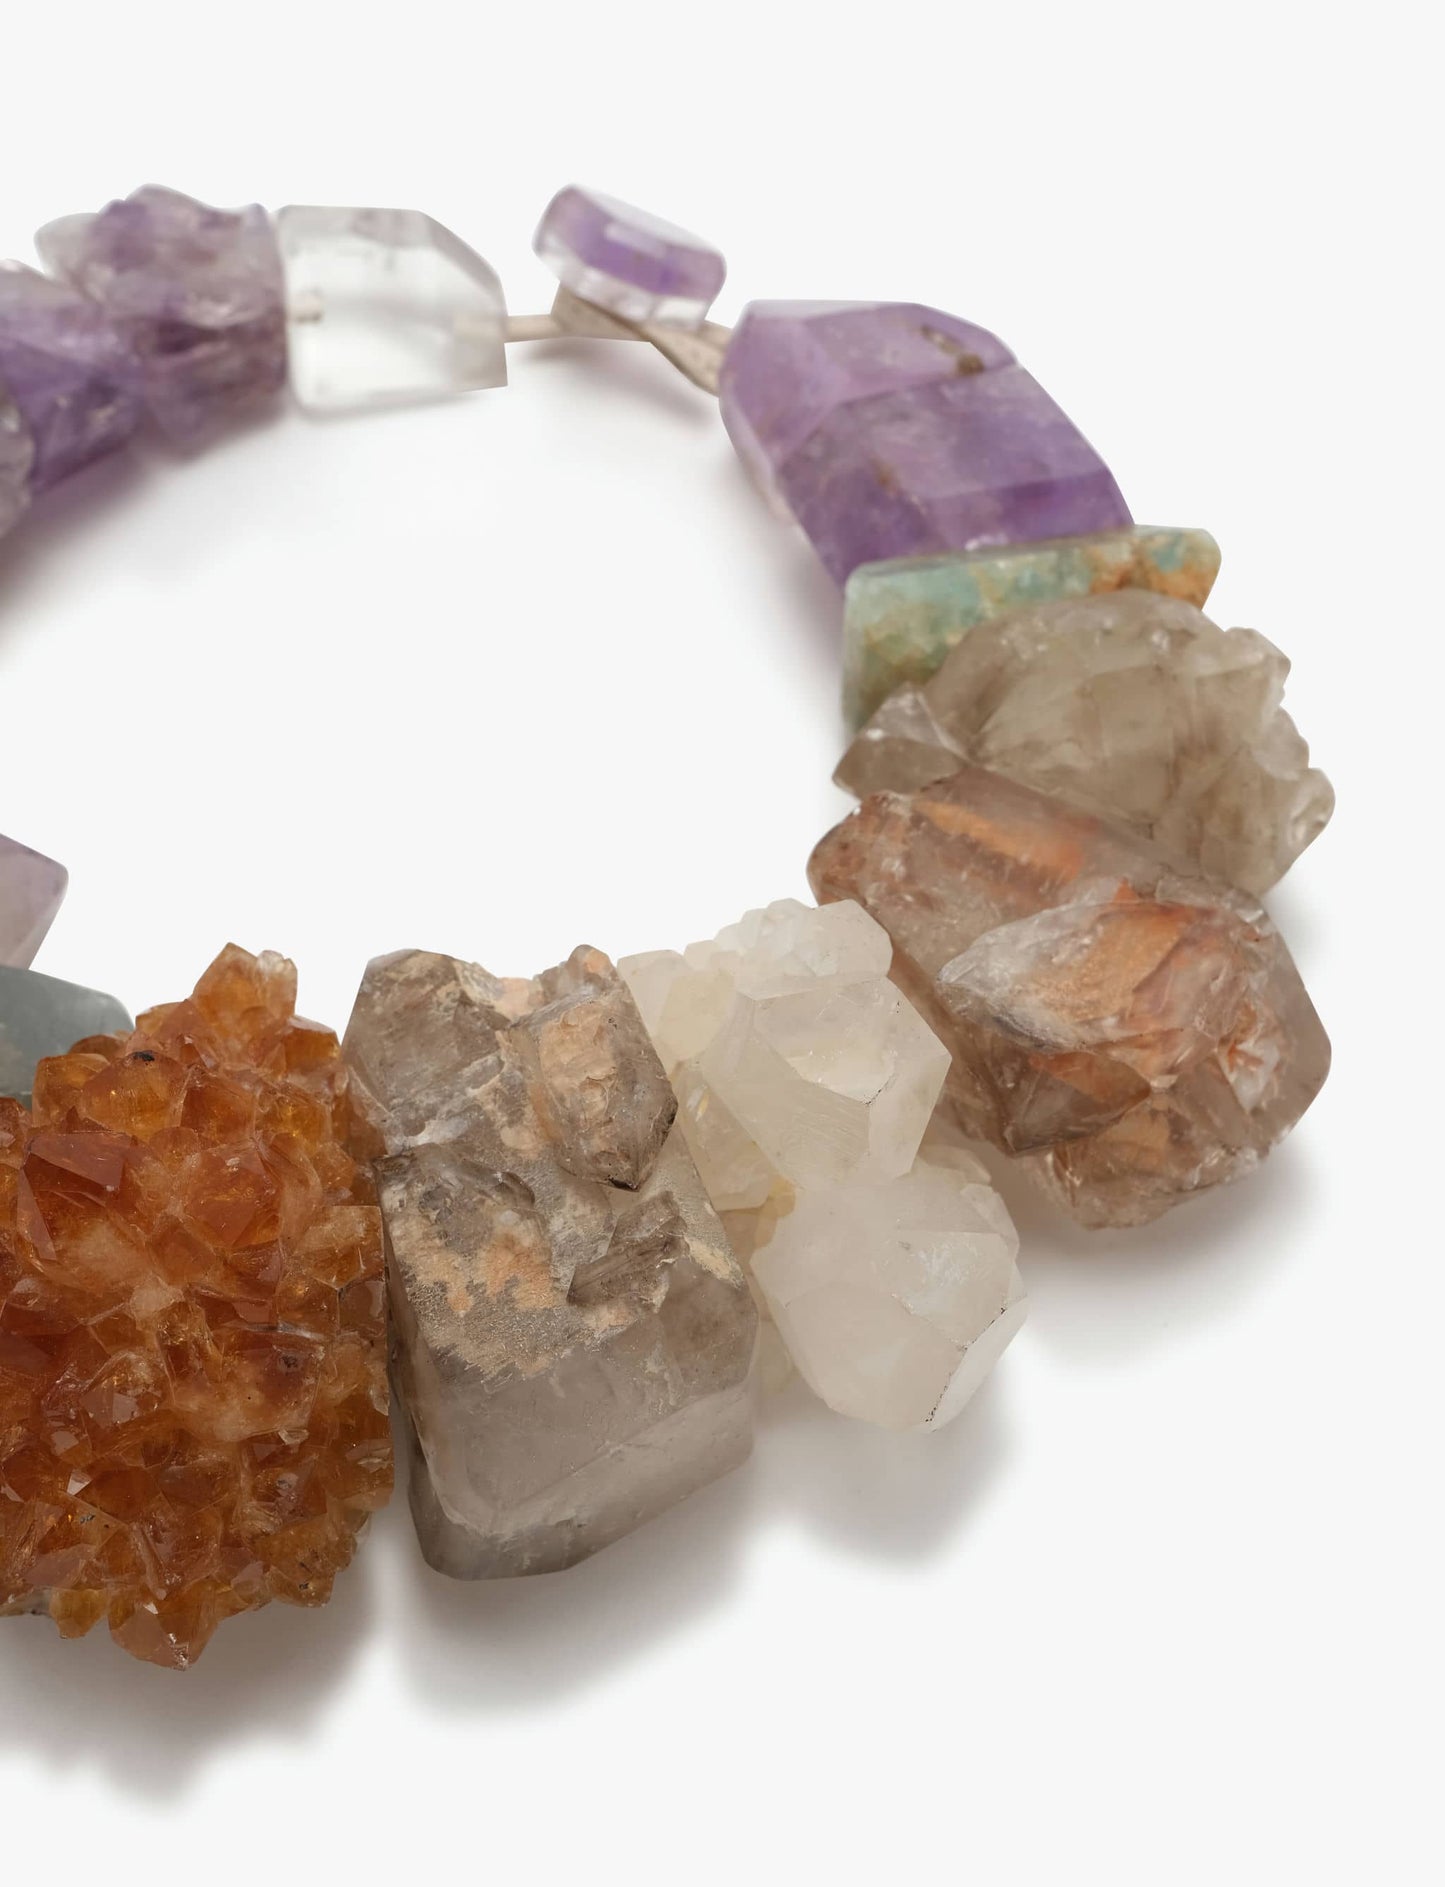 50th anniversary necklace: mixed gemstones